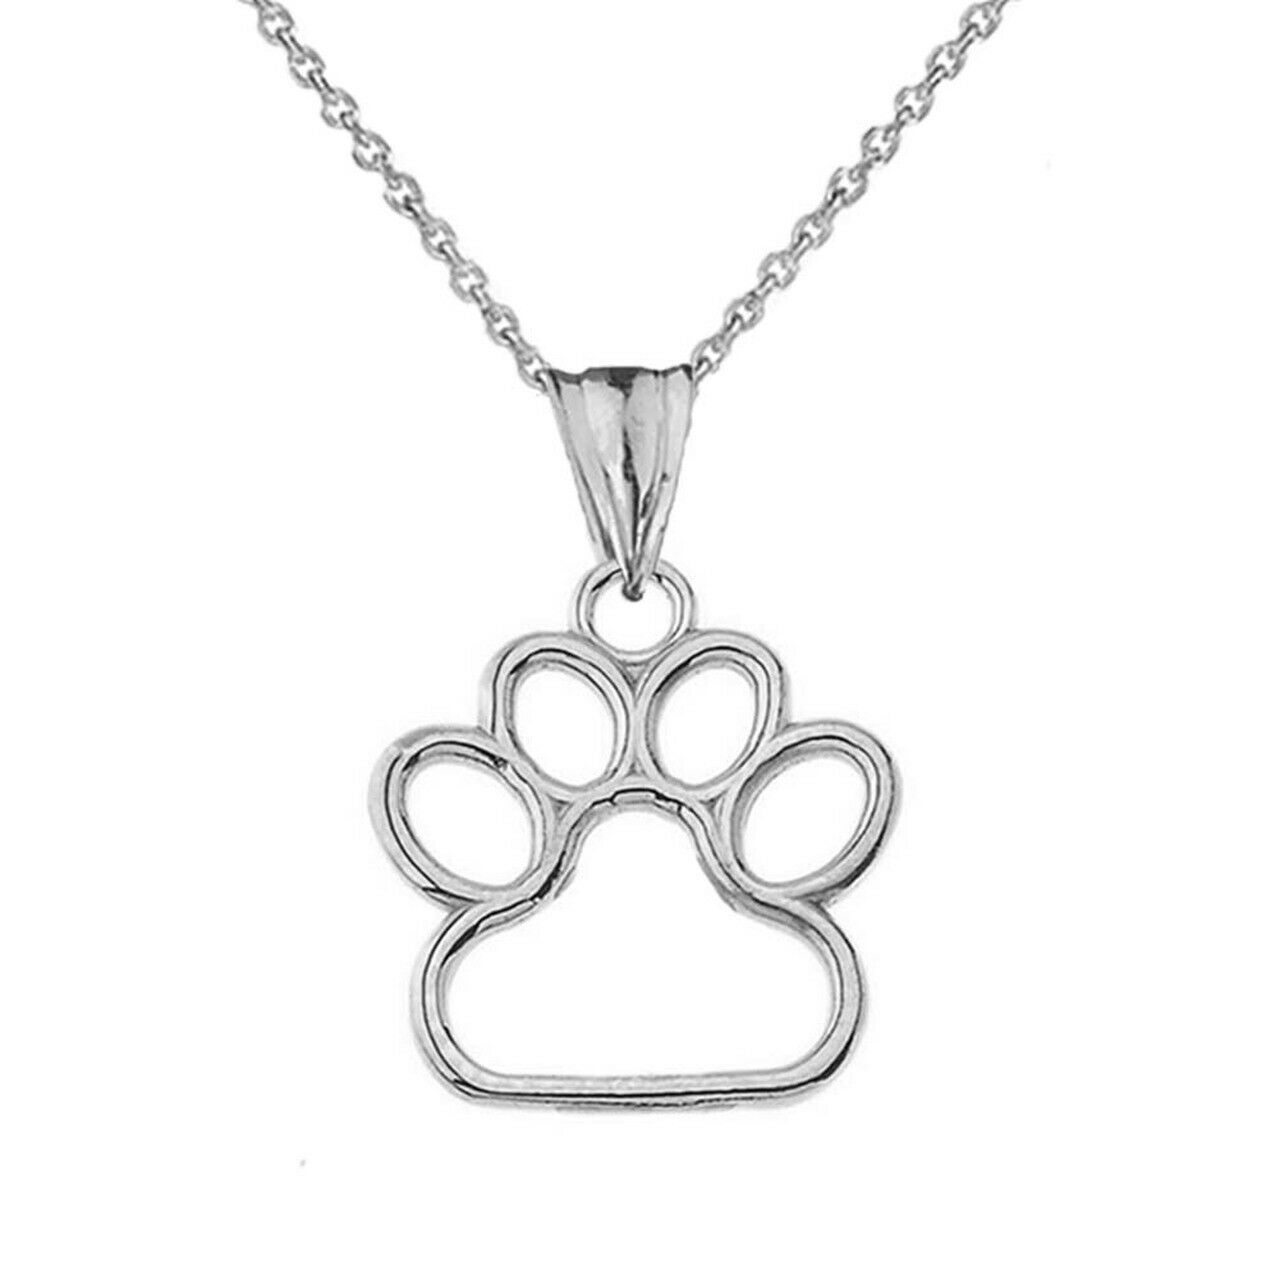 Dainty Dog Paw Print Pendant Necklace In 925 genuine Sterling Silver Made In USA